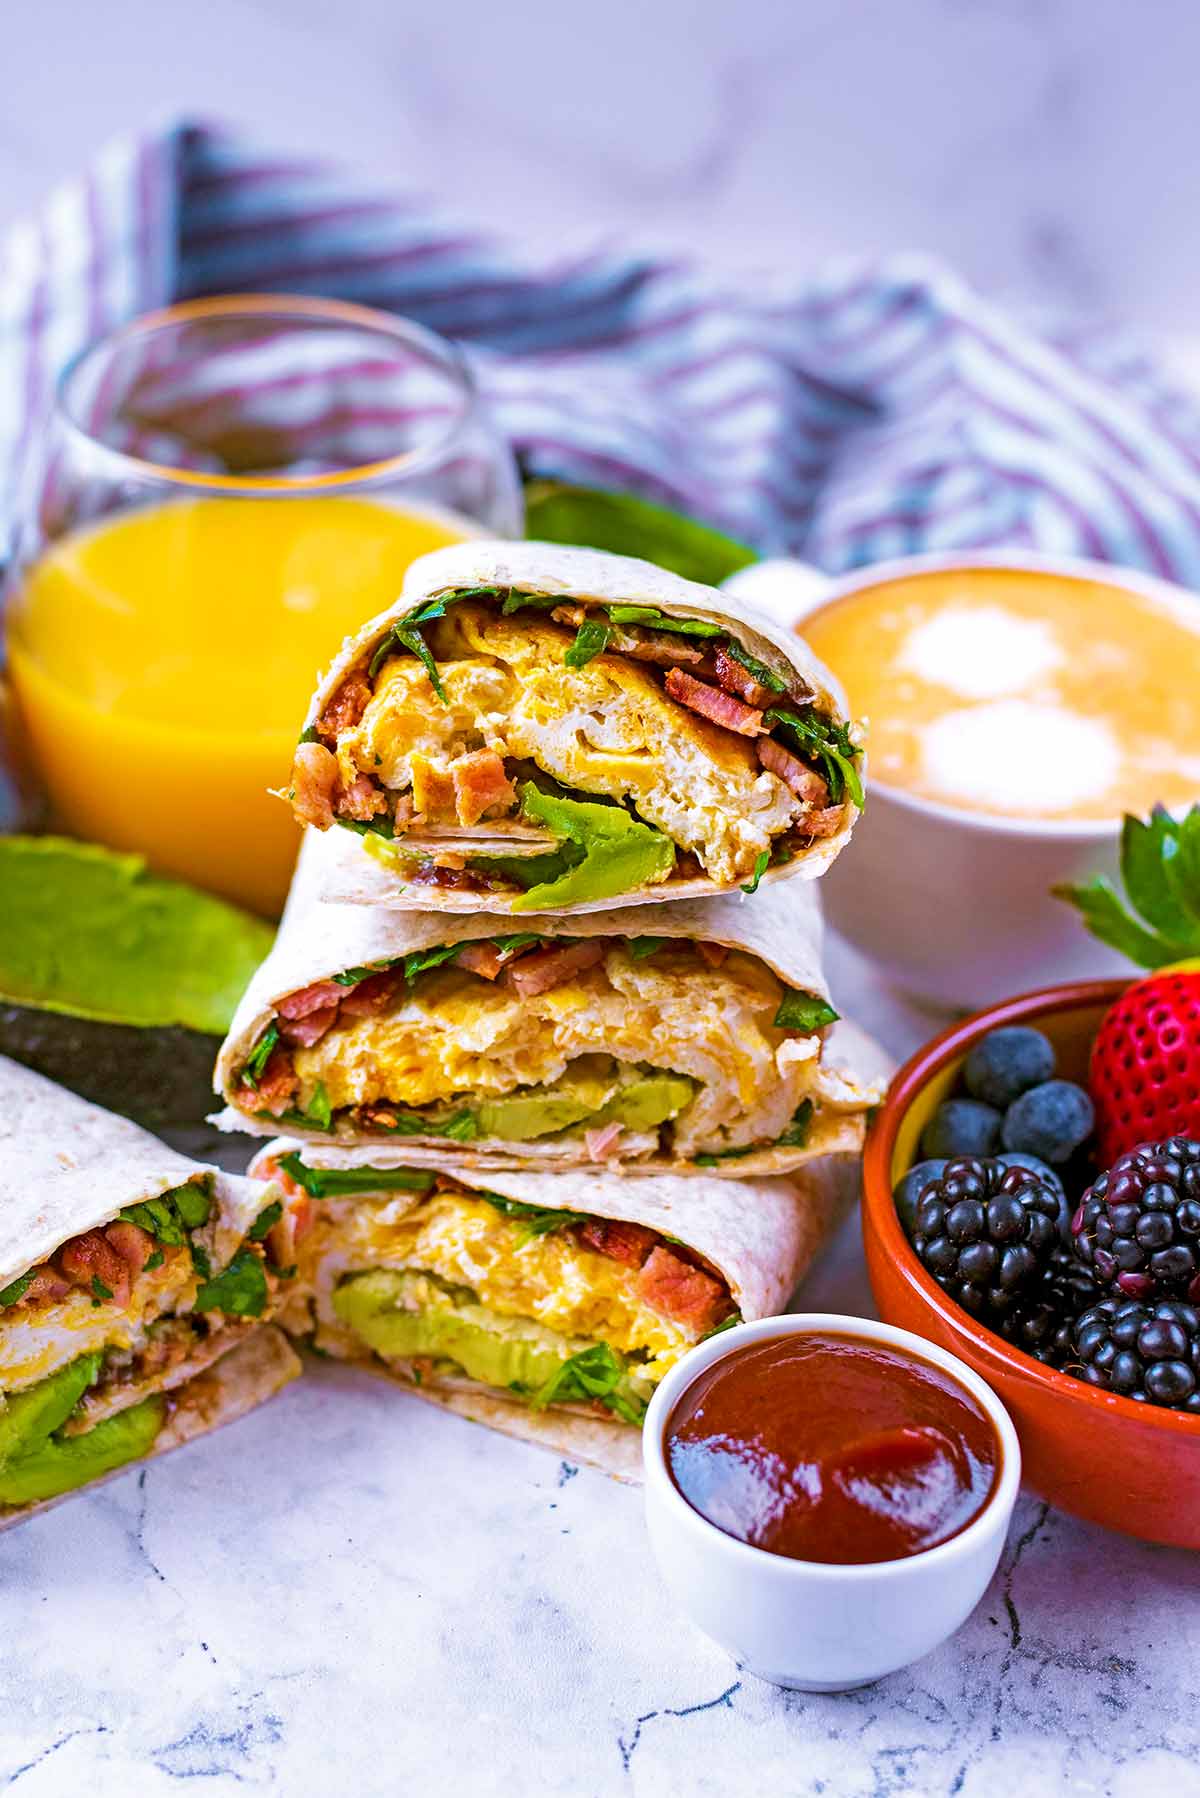 A pile of breakfast wraps next to fruit, orange juice, coffee and barbecue sauce.